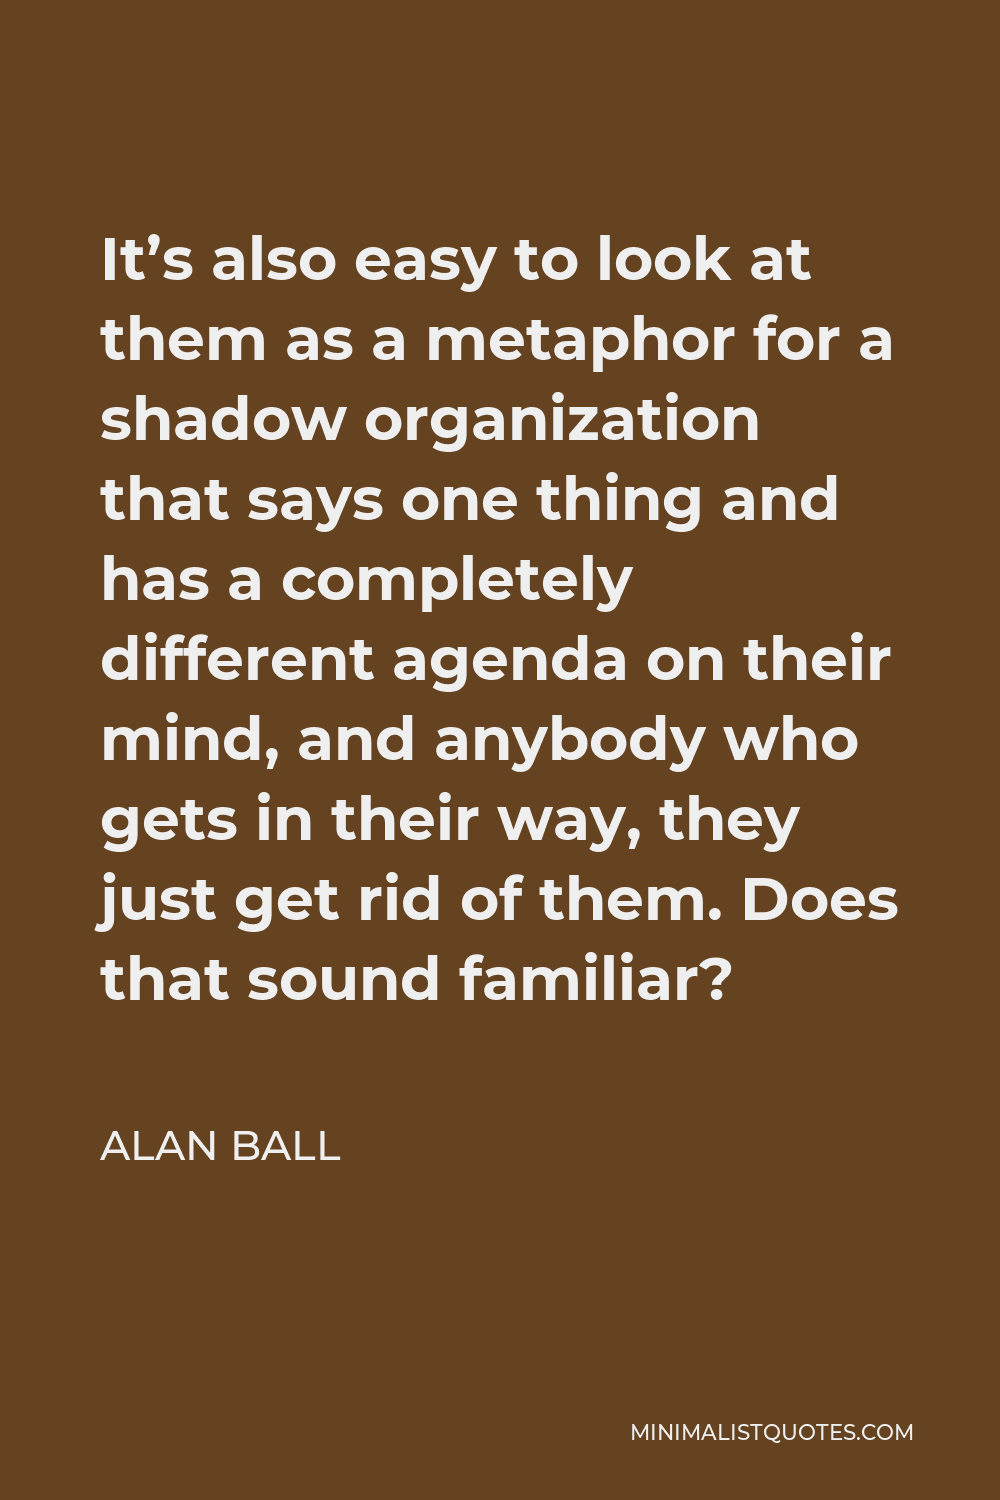 Alan Ball Quote - It’s also easy to look at them as a metaphor for a shadow organization that says one thing and has a completely different agenda on their mind, and anybody who gets in their way, they just get rid of them. Does that sound familiar?